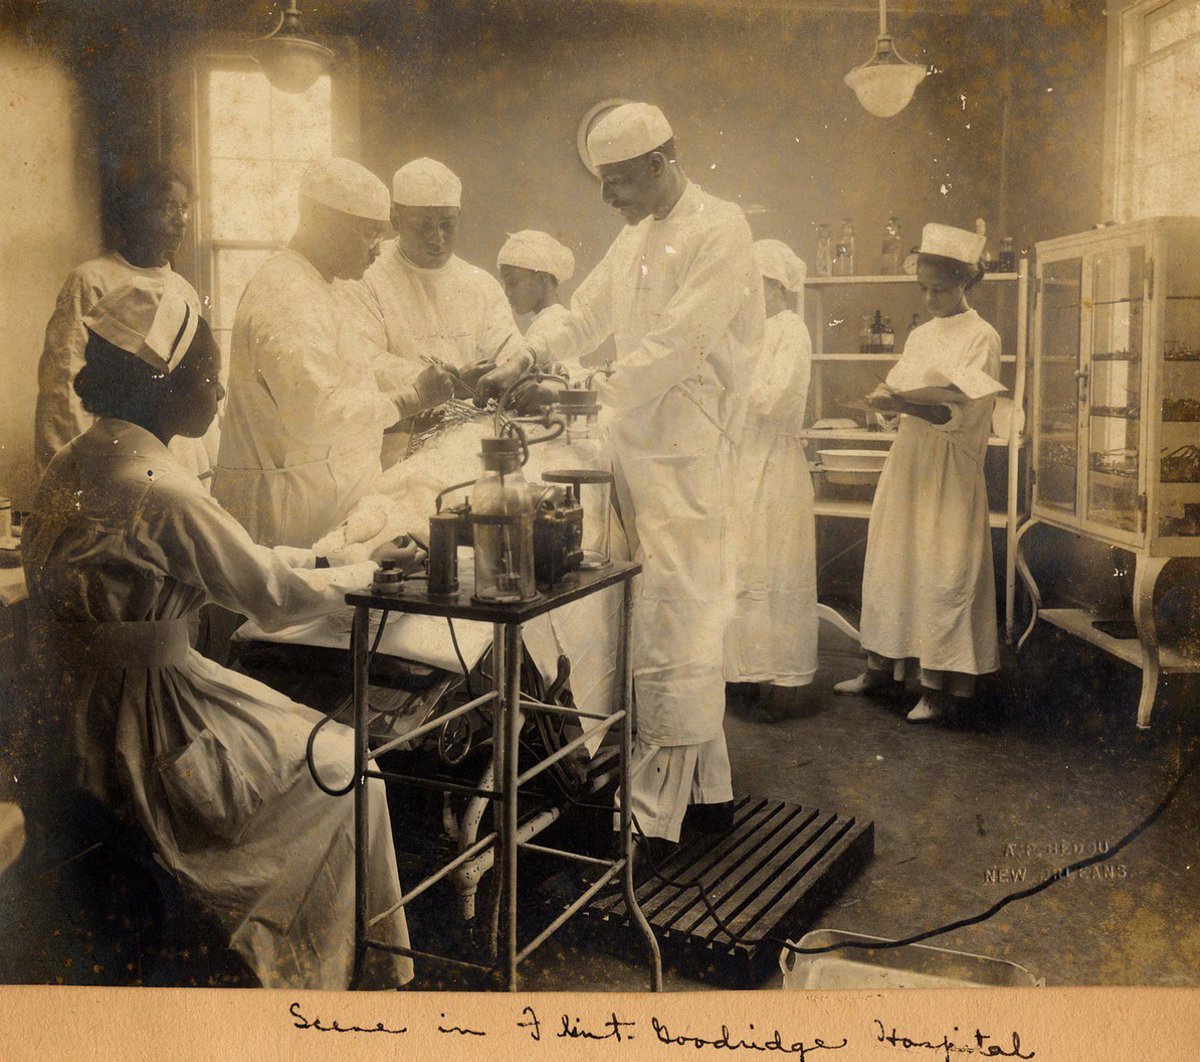 Chief surgeon Dr. Rivers Frederick performing surgery at the Flint-Goodridge Hospital, New Orleans, Louisiana, then part of the historically black Dillard University, c. 1932MOMA